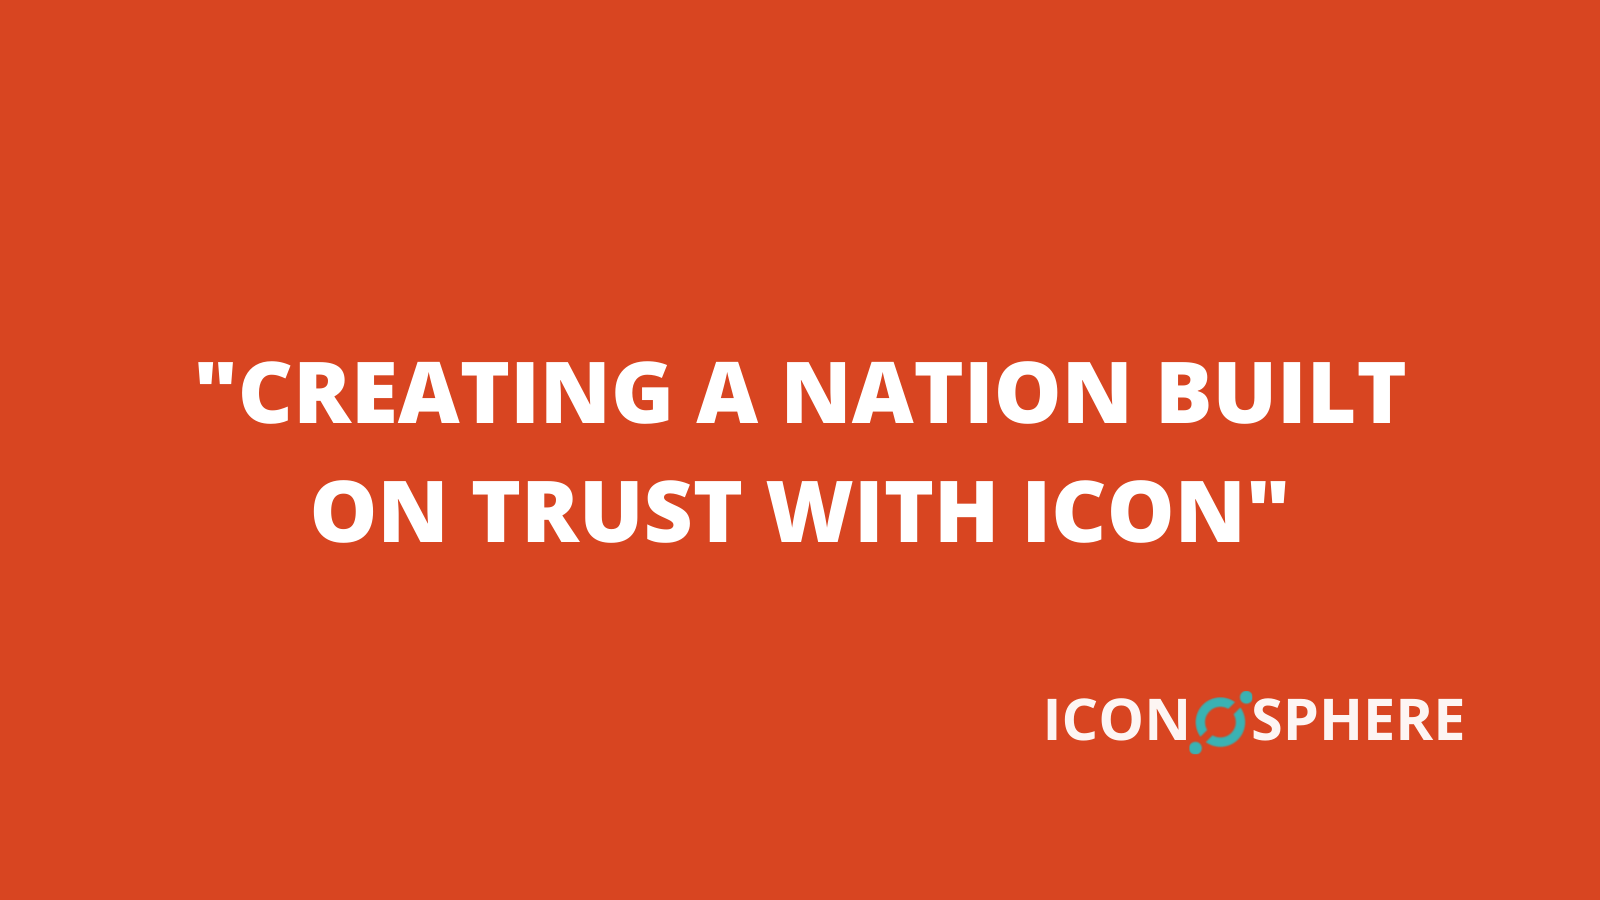 You are currently viewing ICONOsphere latest Collaboration with ICON.